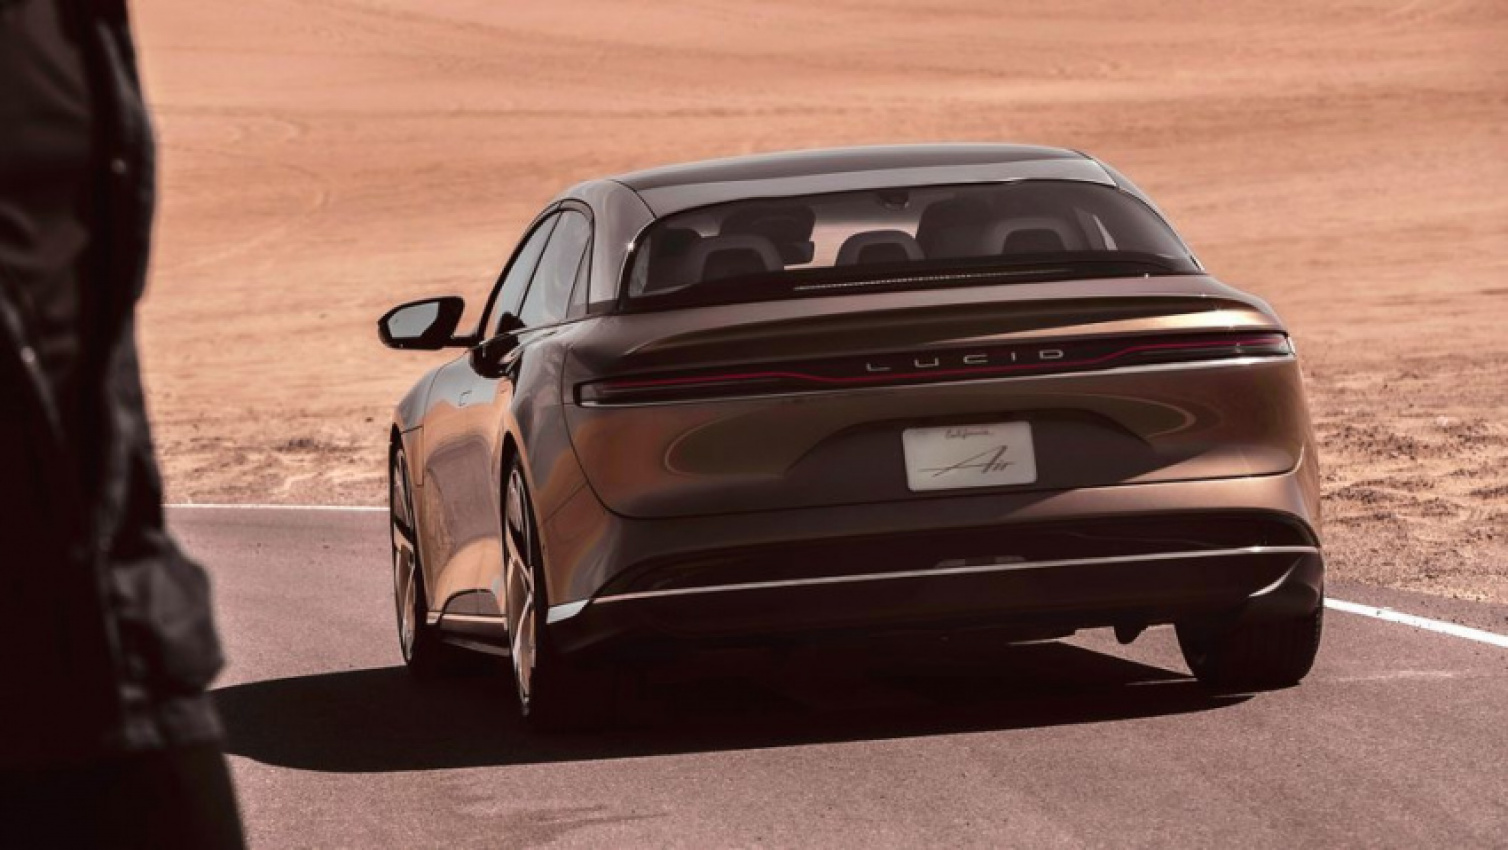 apple, autos, cars, hp, lucid, air, auto news, california, ccs, ev, iphone, limousine, tesla, luxurious 1,080hp lucid air is finally ready - it's kind of like the iphone of evs